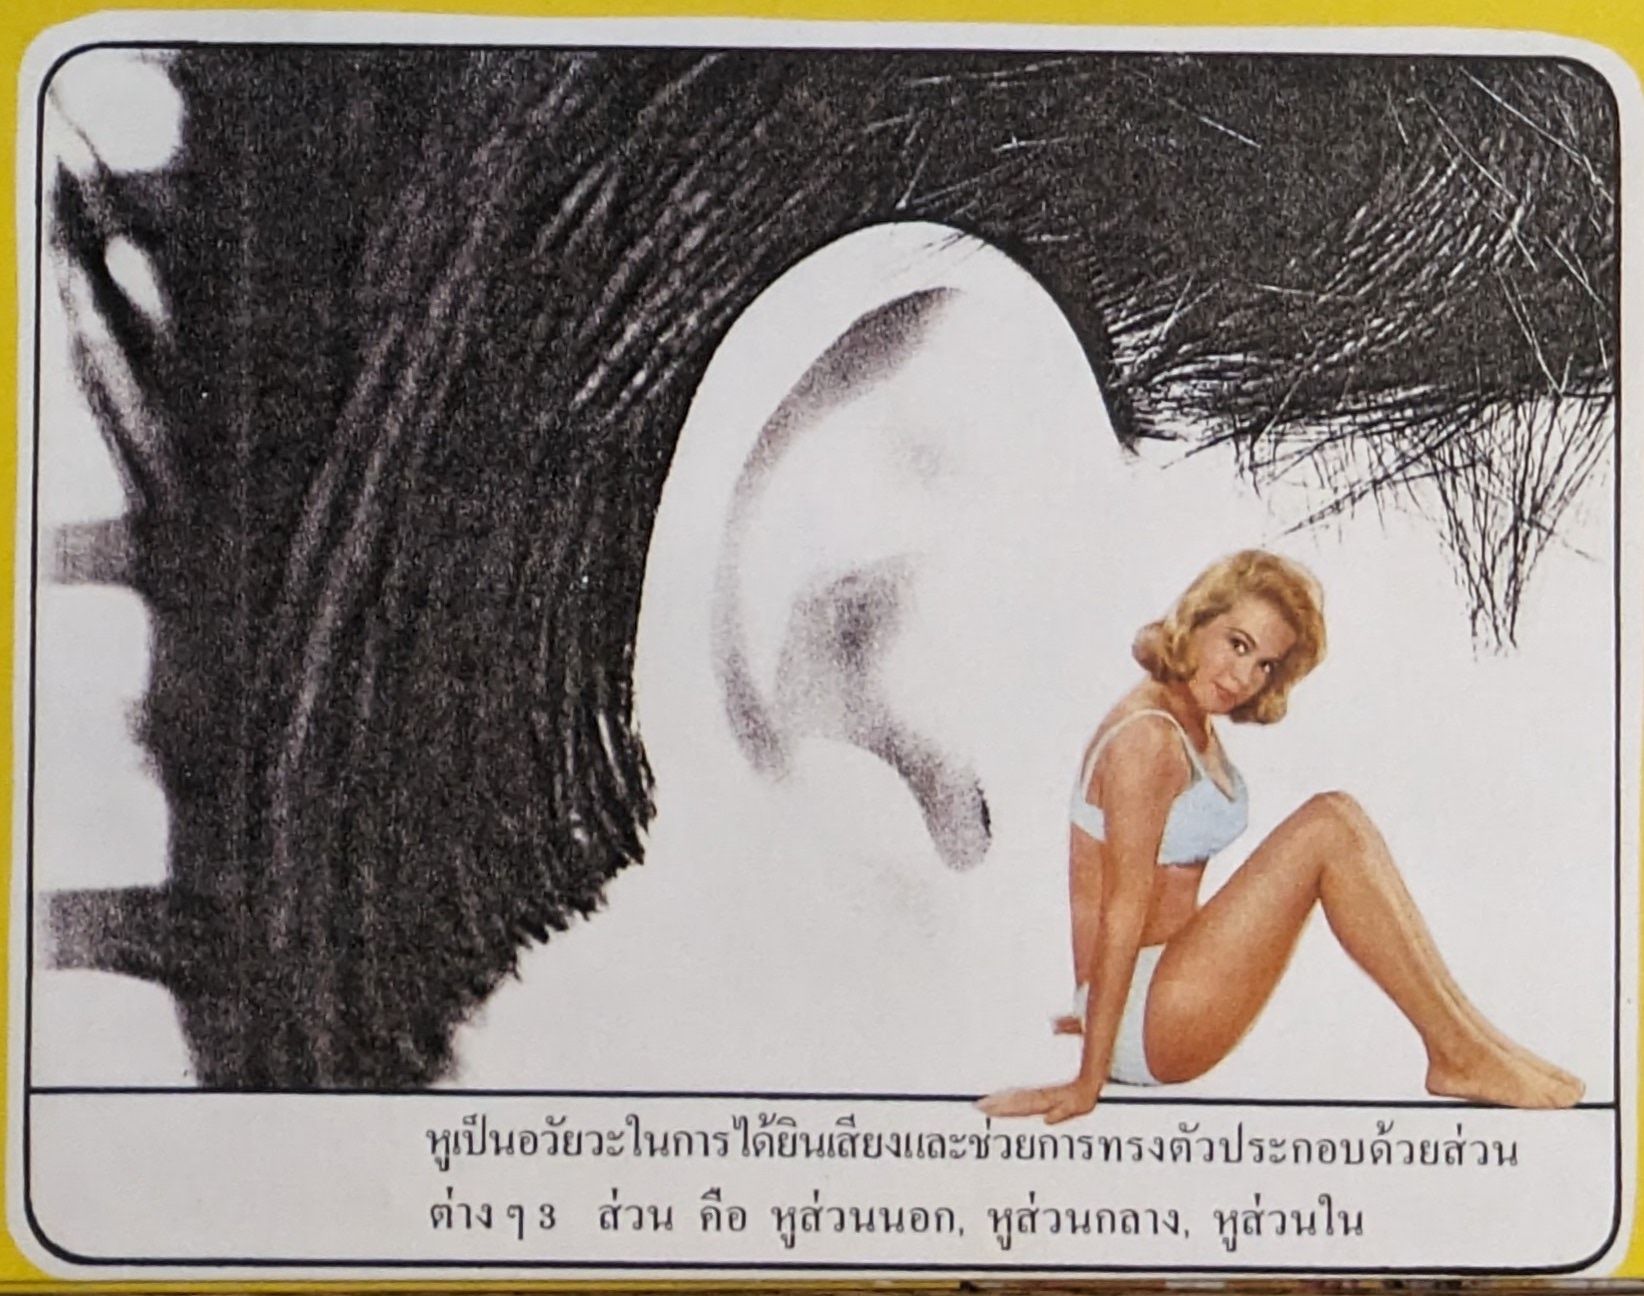 Image of a woman in a swimsuit crudely pasted on top of a clipping of a person's ear, above some Thai text